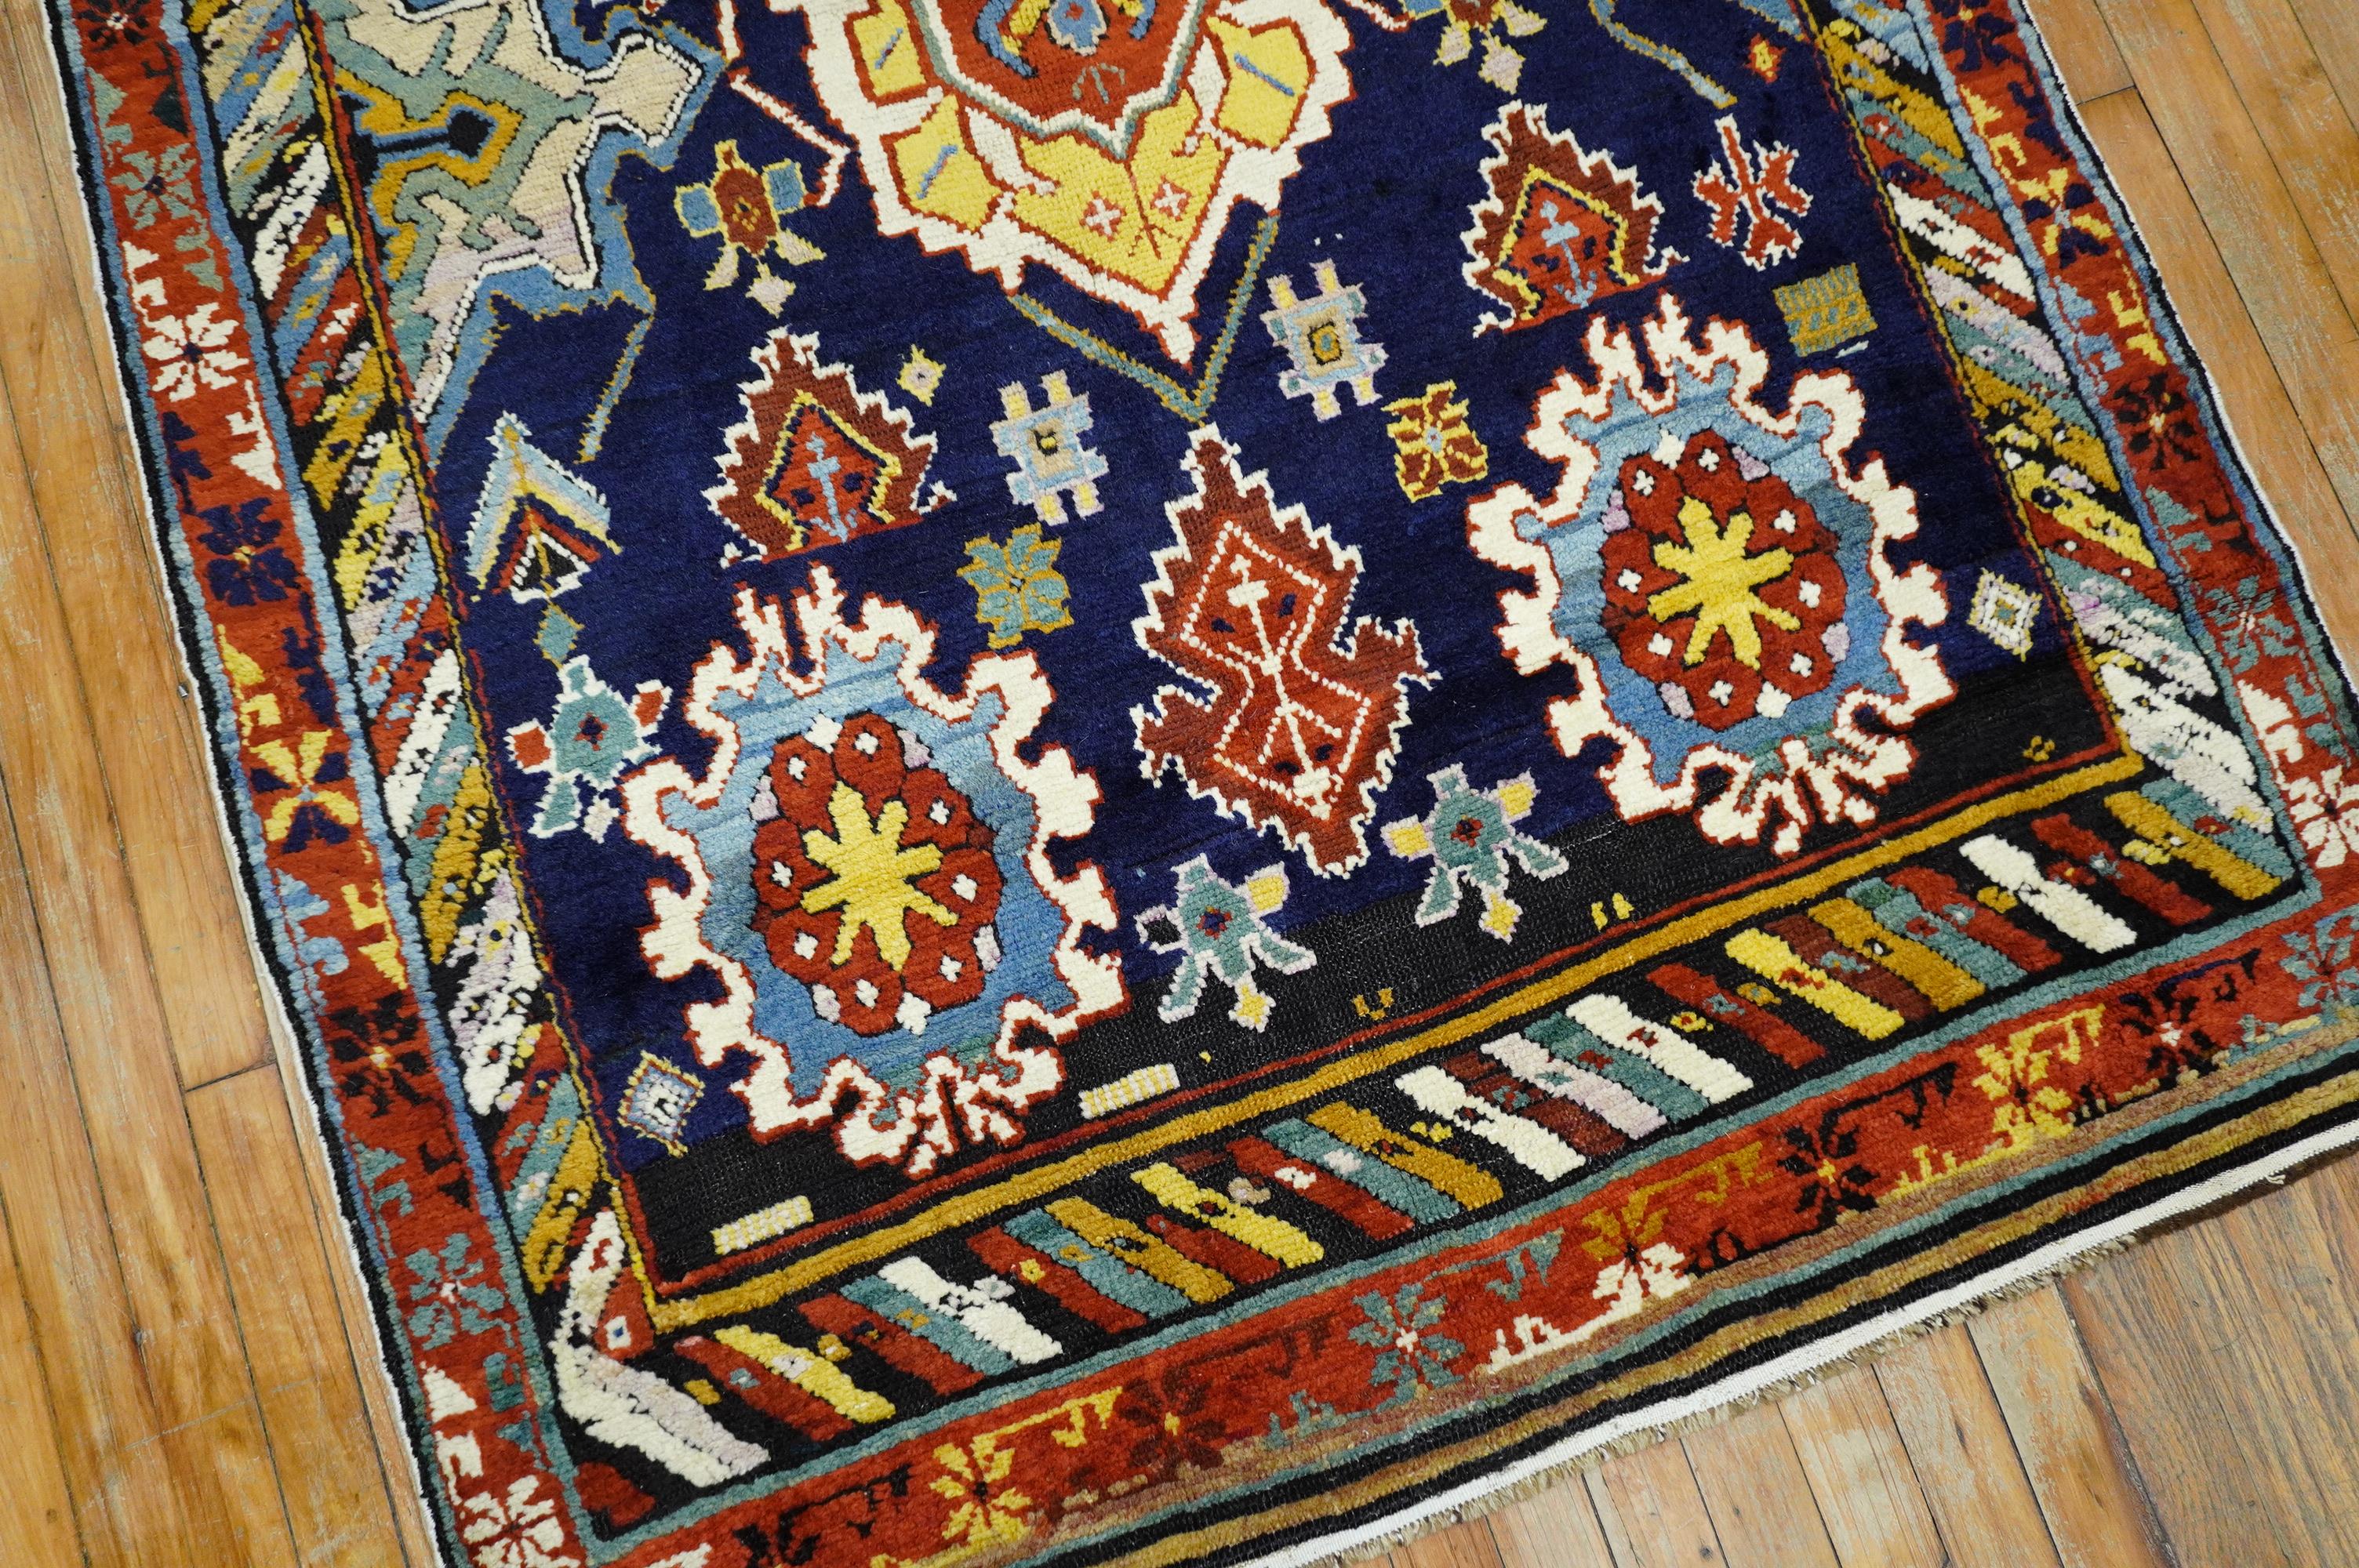 Stunning full pile condition Caucasian Karaghashli Shirvan rug from the late 19th century. Large scale all over motif with jewel tone colors on a deep navy blue ground,

circa 1880, measures: 4' x 9'7